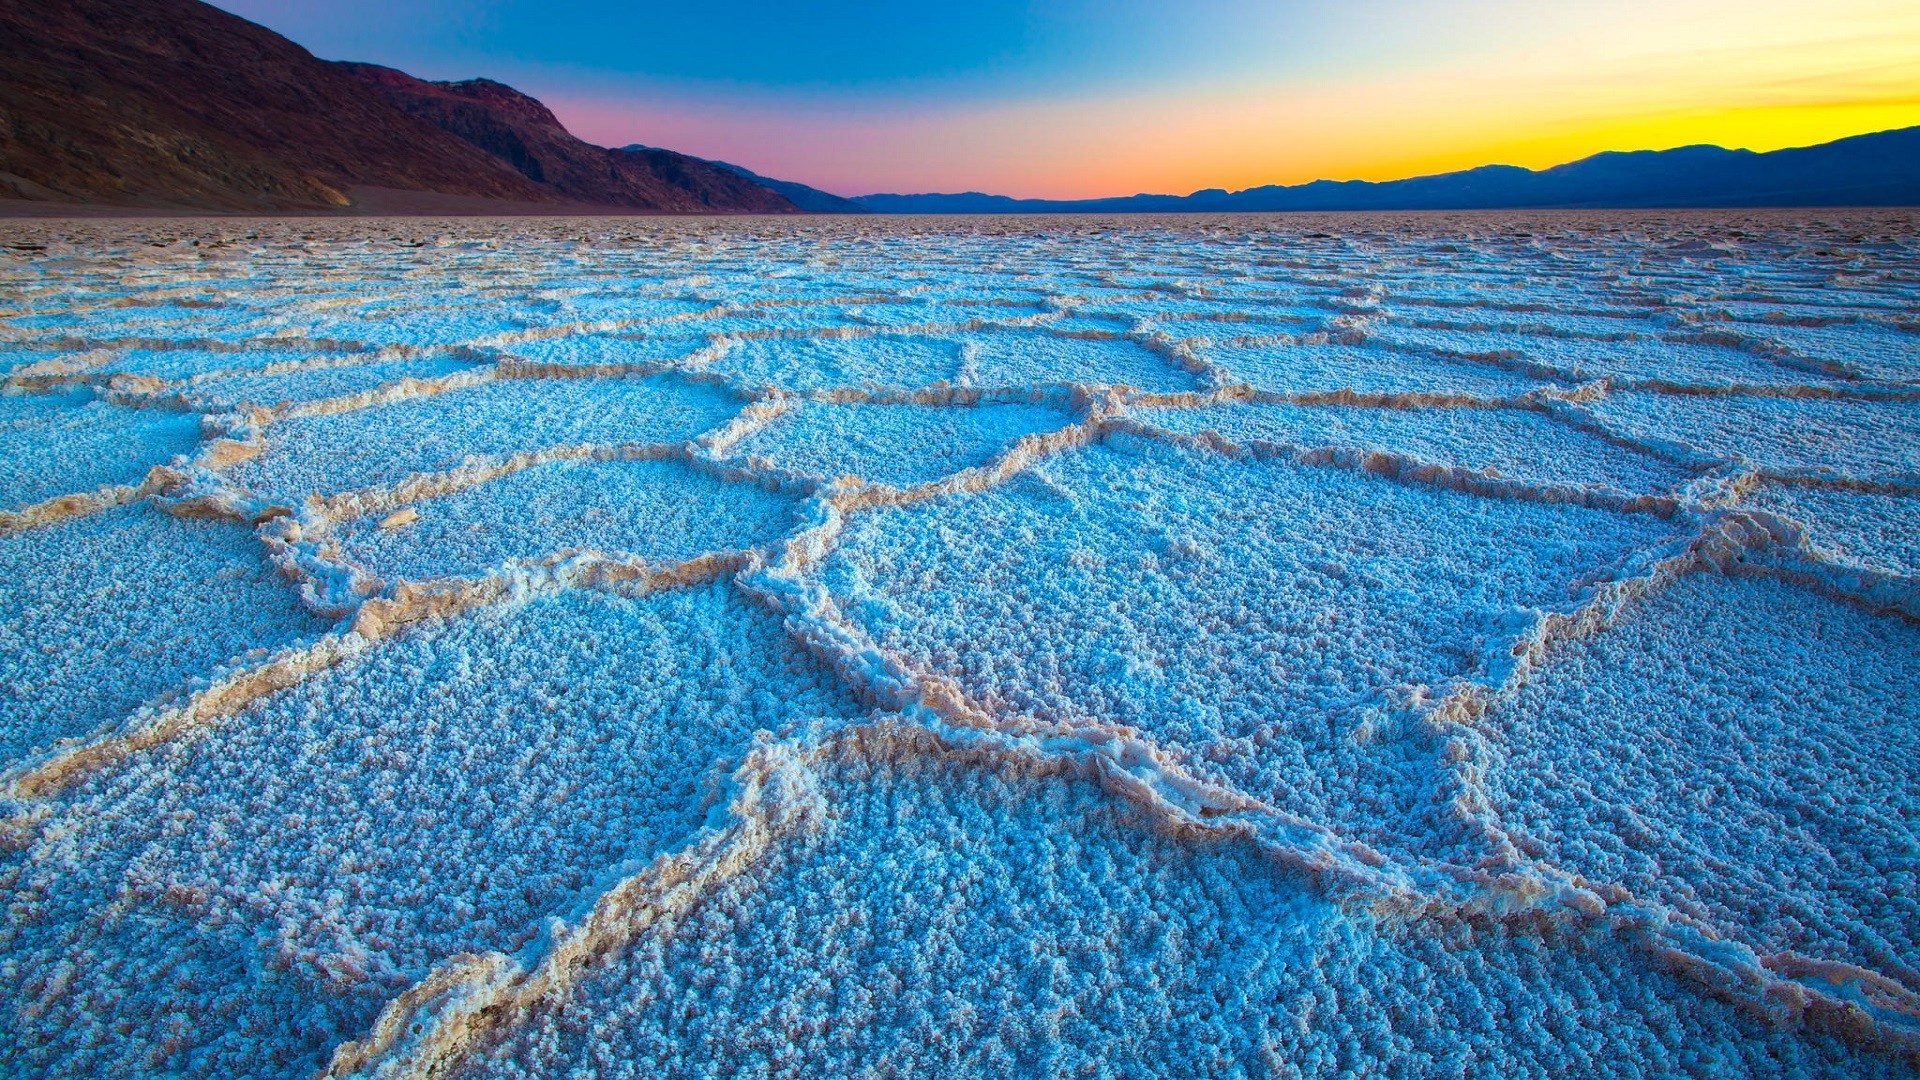 Death Valley National Park, Sunrise scenery, Mountain landscapes, Badwater Basin, 1920x1080 Full HD Desktop